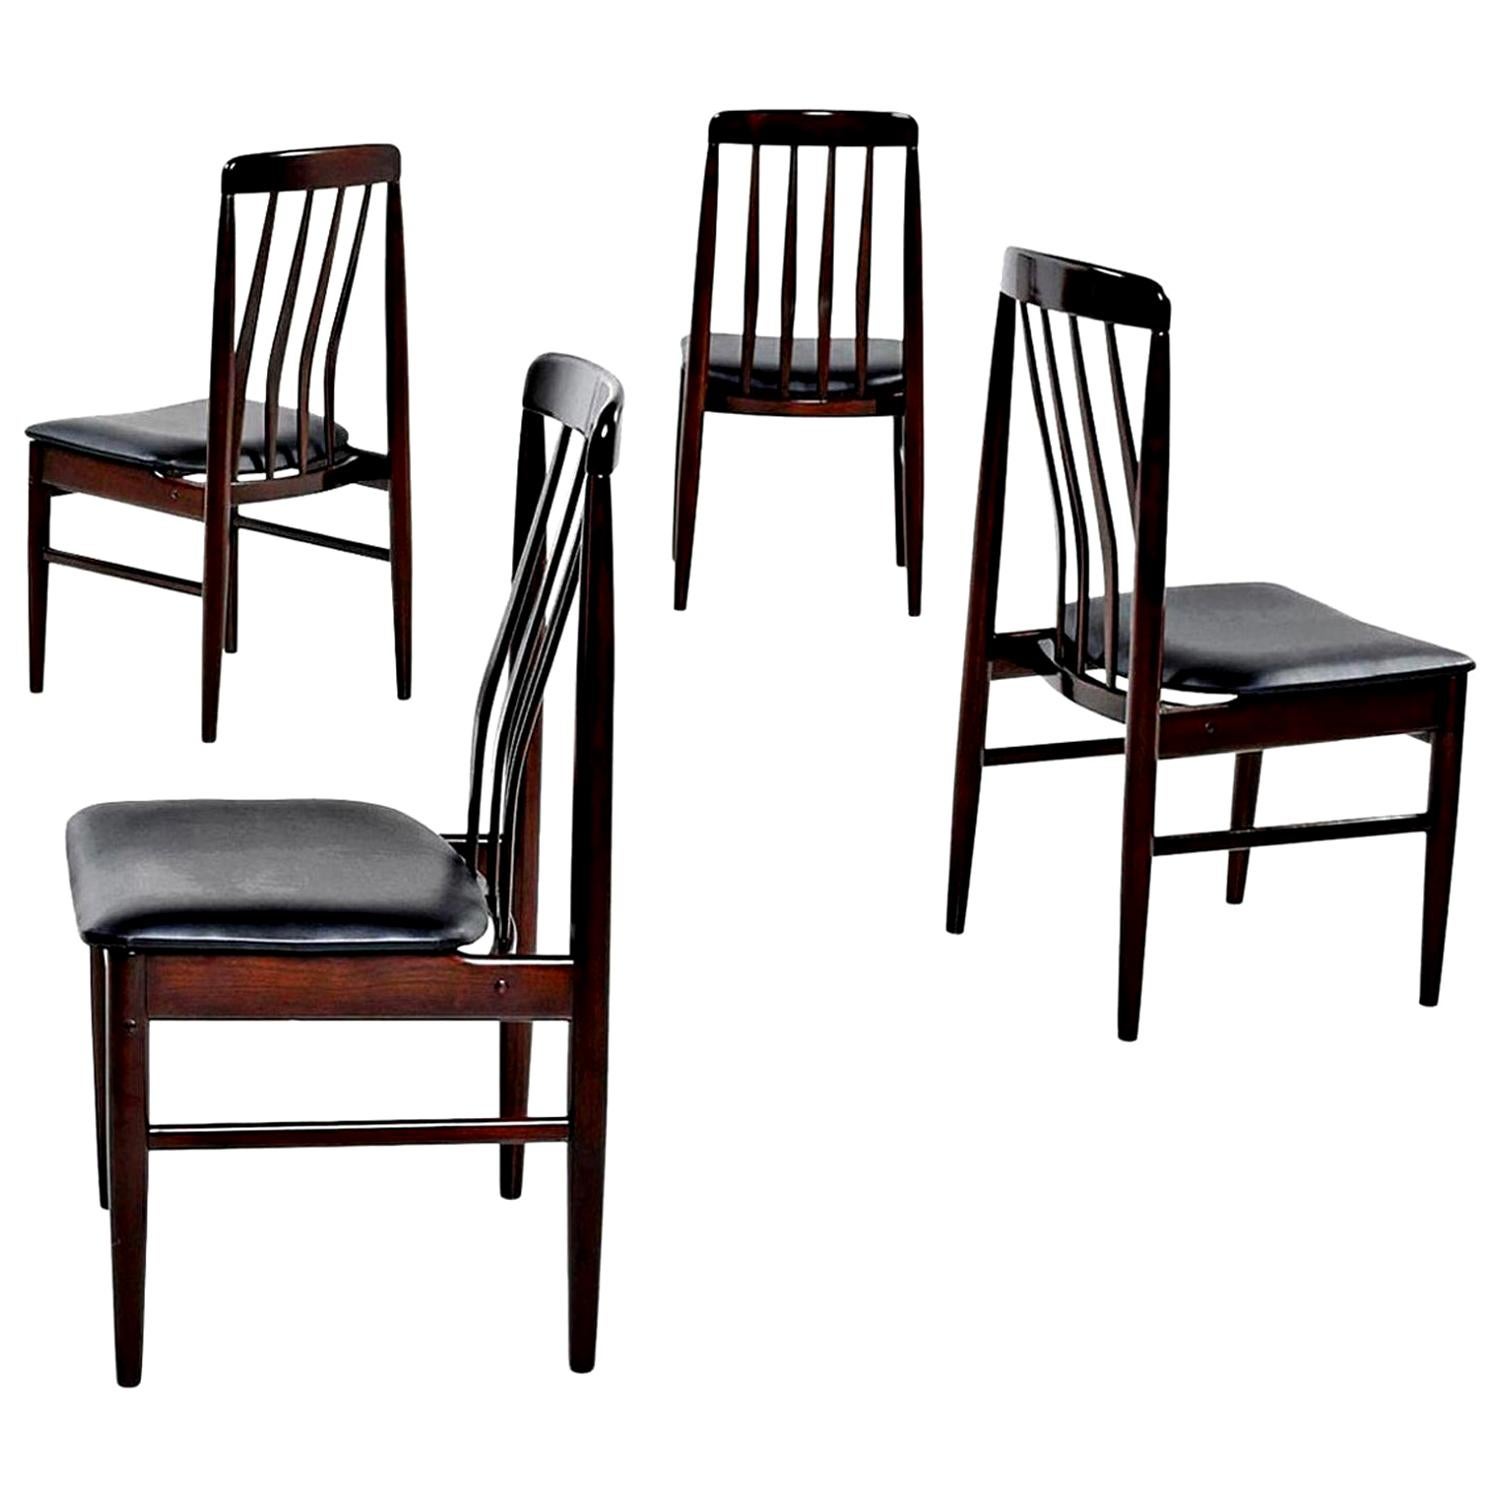 Rosewood Slat Back Dining Chairs with New Vinyl Seats, Danish Modern, 1960s